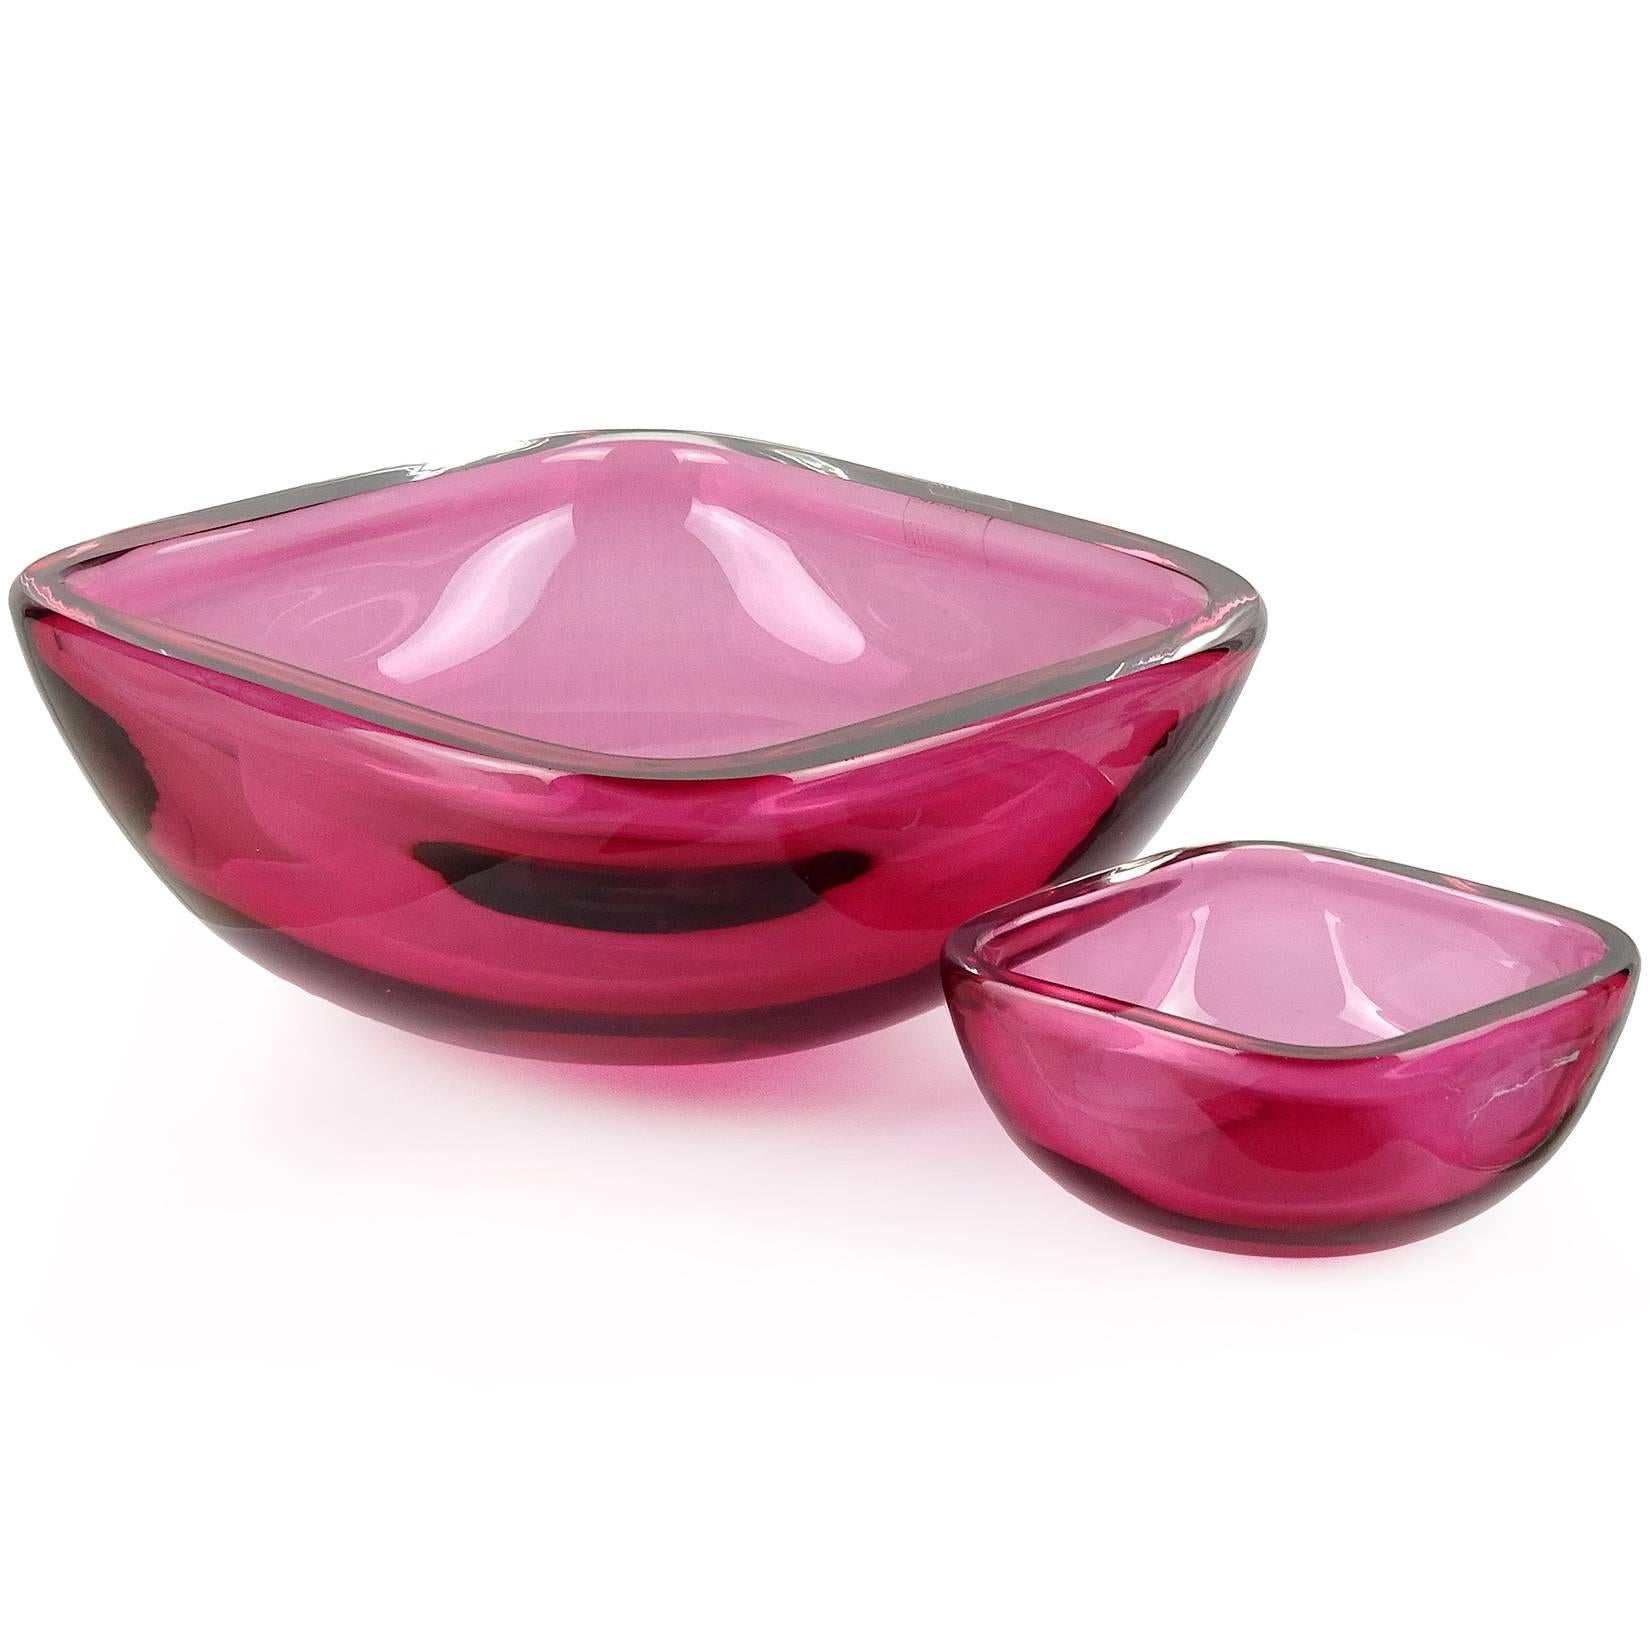 Gorgeous Murano handblown Sommerso pink Italian art glass decorative bowl set. Labelled “Oggetti Italy”, circa 1970s-1980s, and attributed to designer Alfredo Barbini. The piece is very large at 8 3/4” squared, with small bowl measuring almost 4